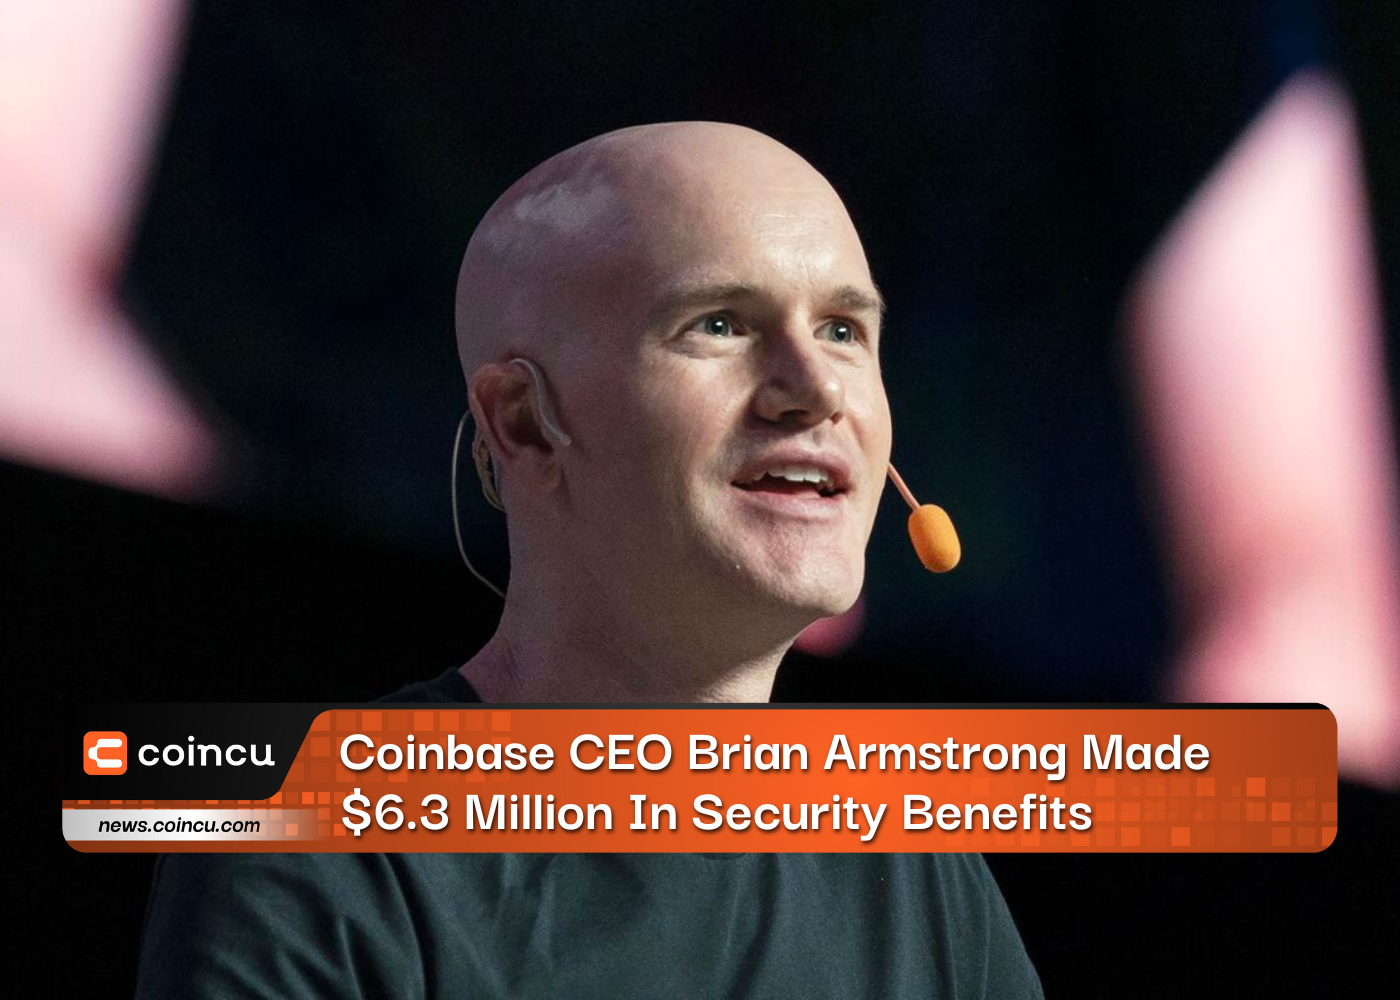 Coinbase CEO Brian Armstrong Made $6.3 Million In Security Benefits